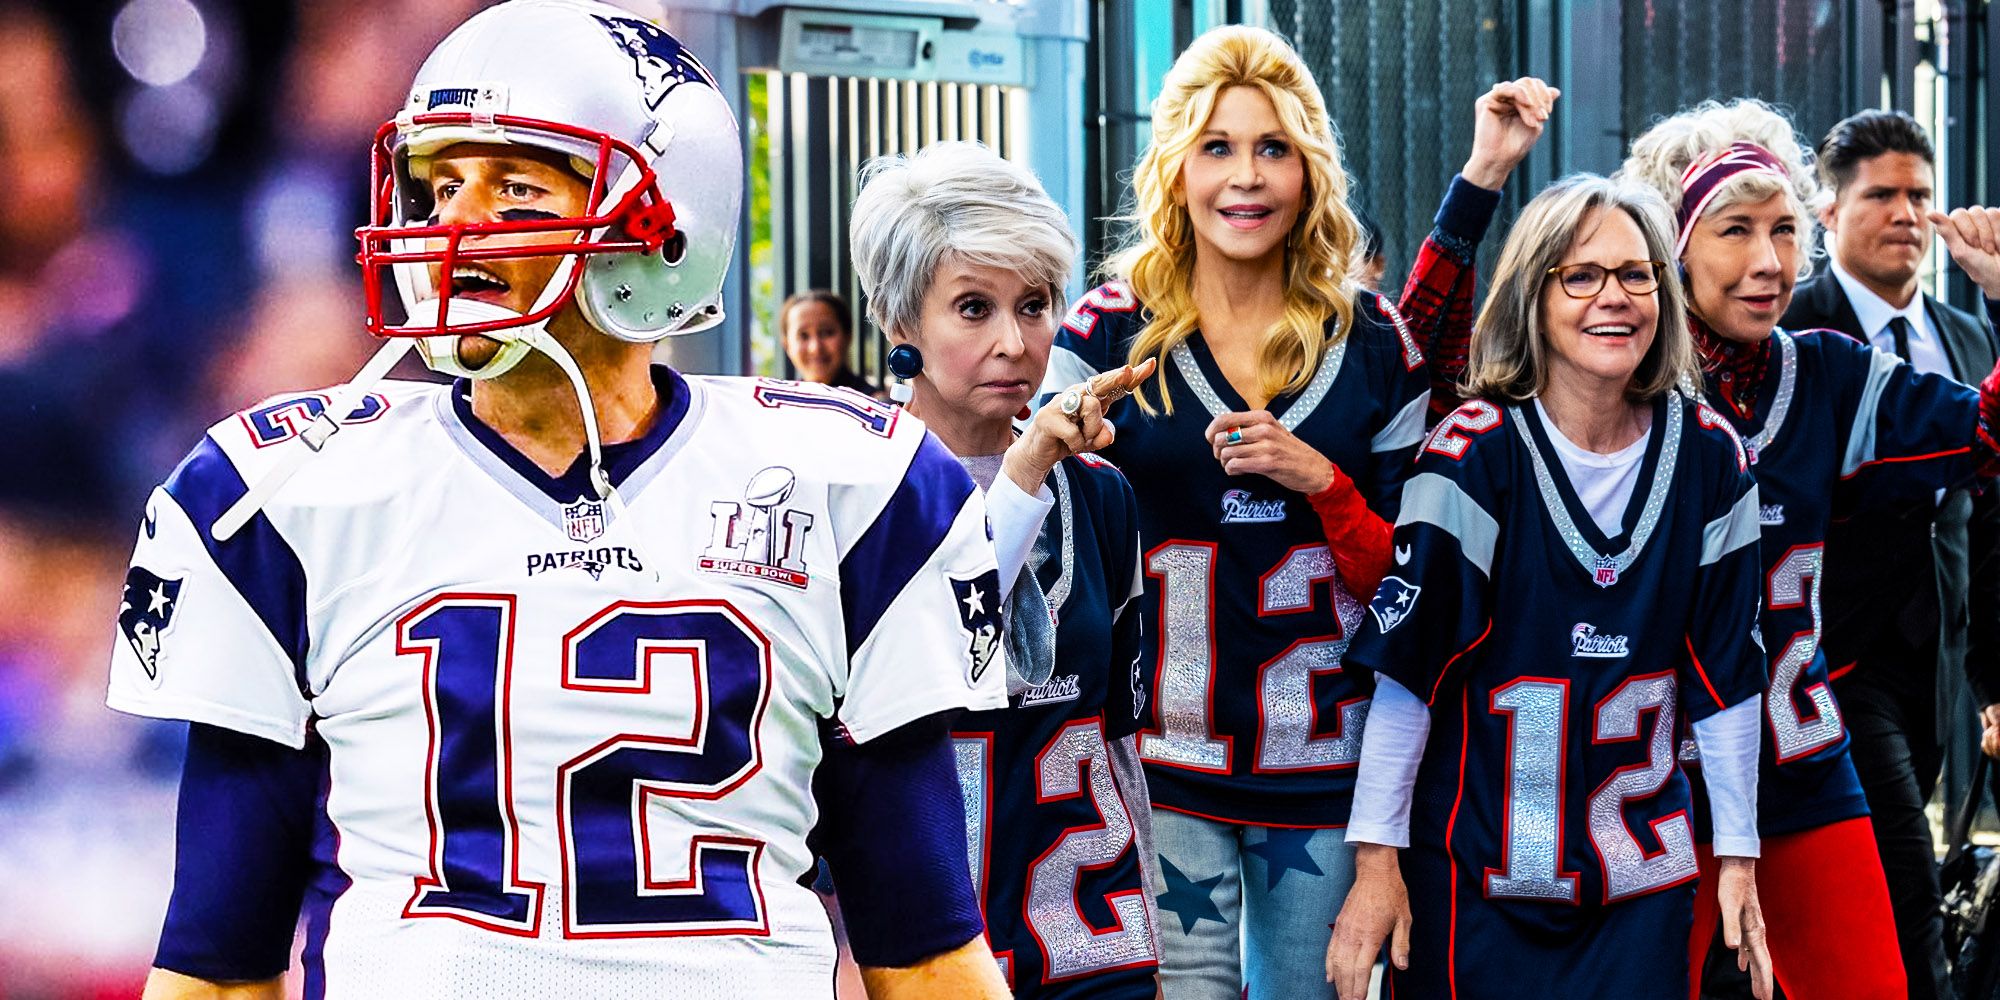 80 For Brady's End-Credits Retirement Scene Is Even More Hilarious Now